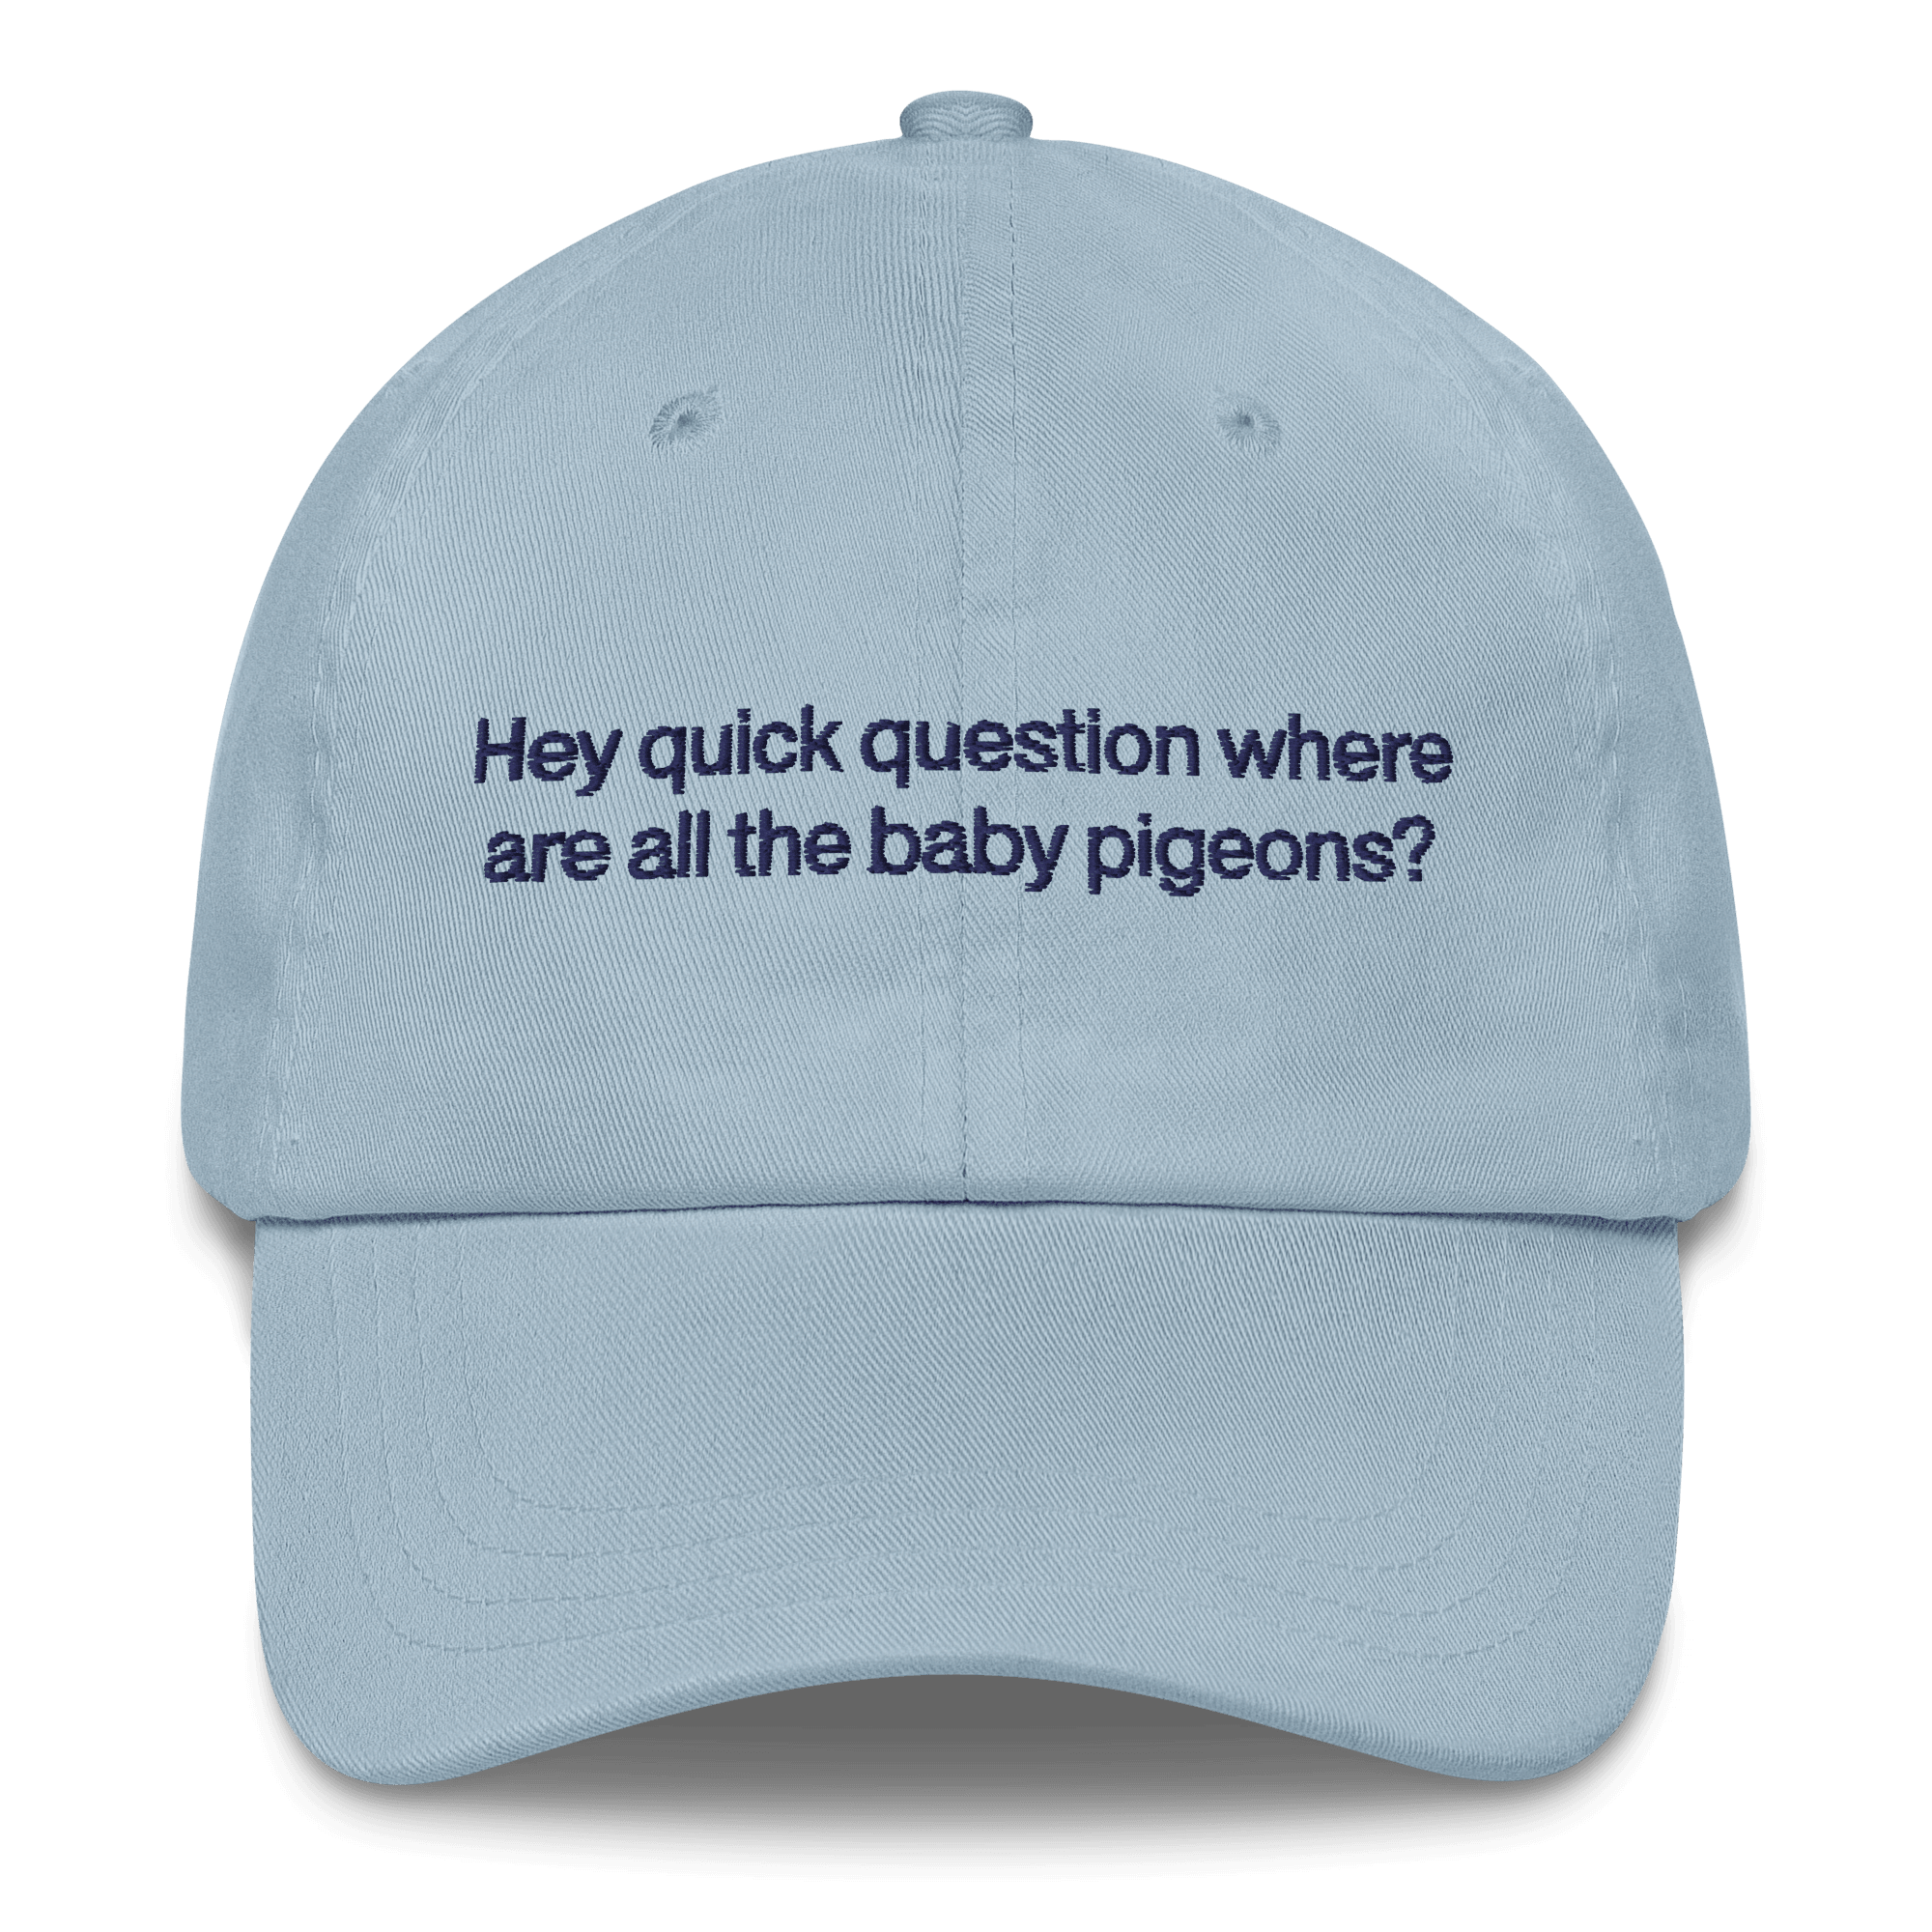 Hey quick question where are all the baby pigeons? 🐦 Embroidered Hat - Polychrome Goods 🍊